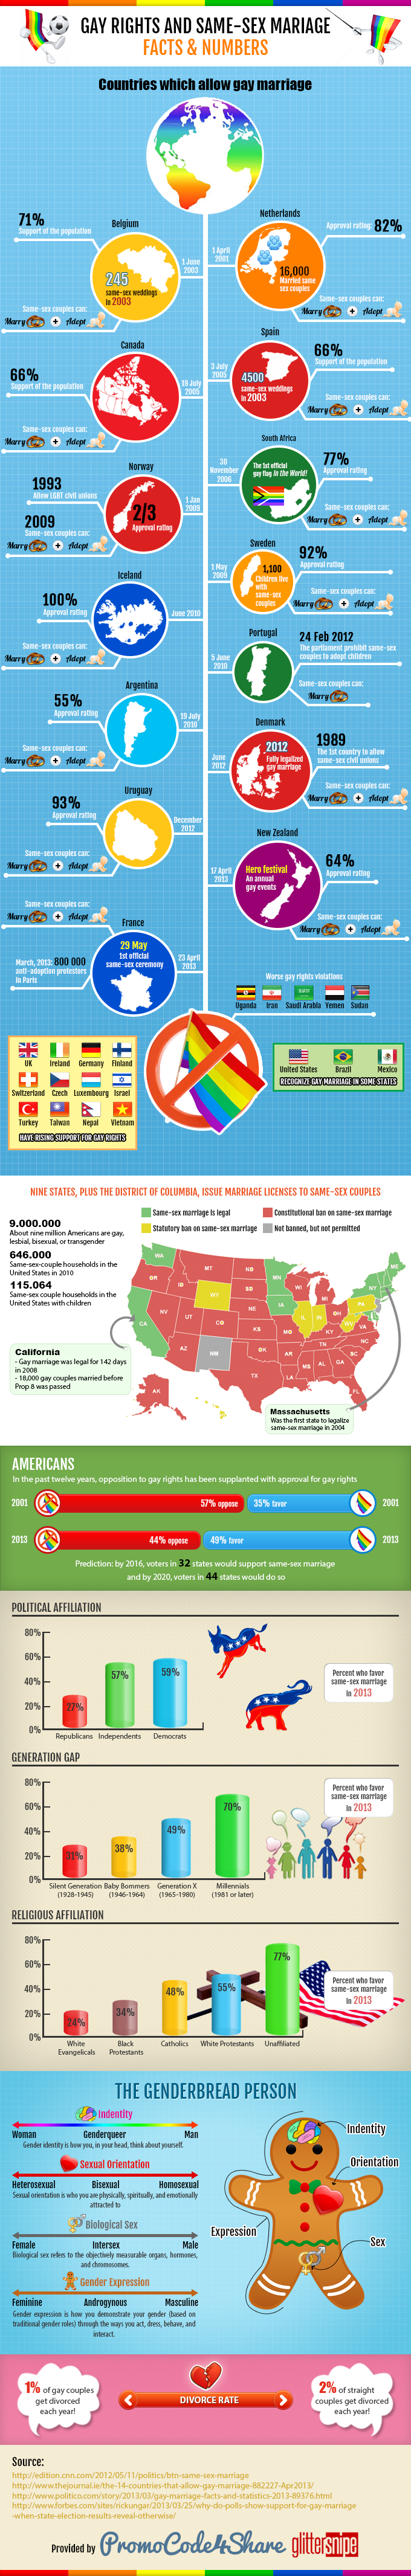 Gay Rights and Same-Sex Marriage: Facts and Numbers